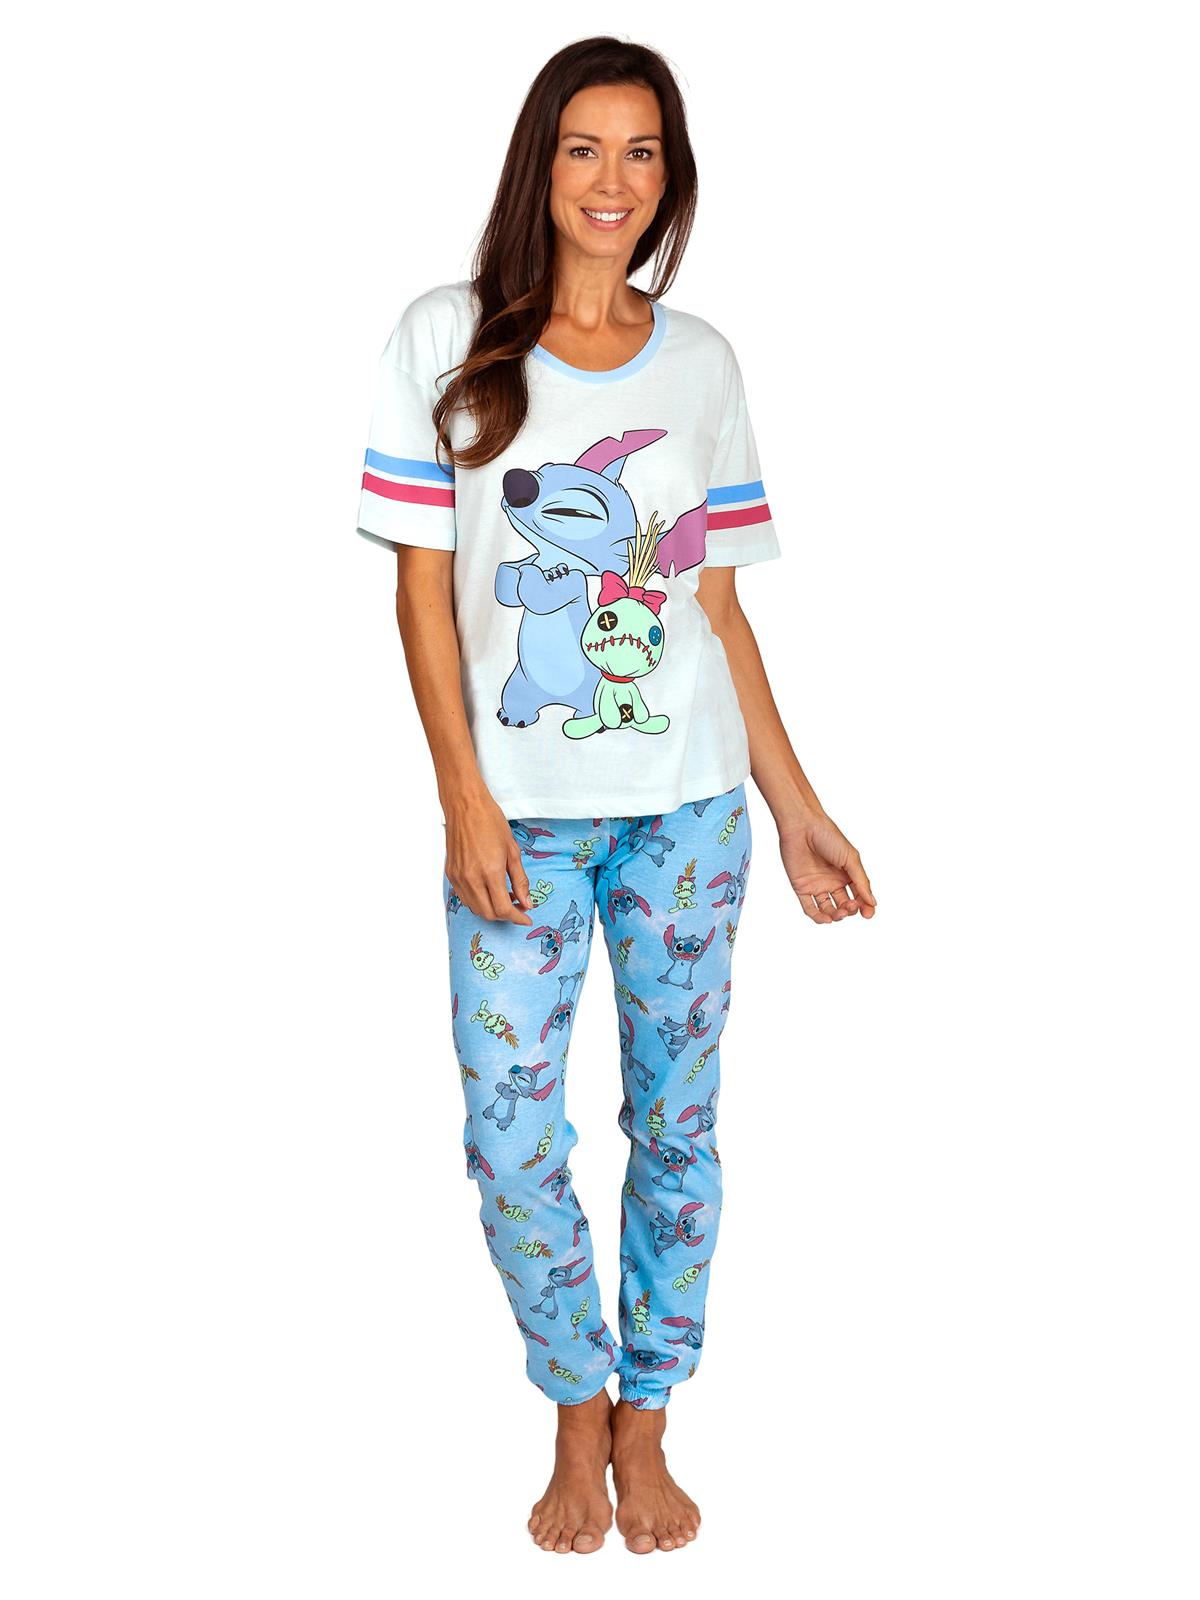 Disney Stitch Jogger Pants Set for Toddlers and Kids, Drawstring